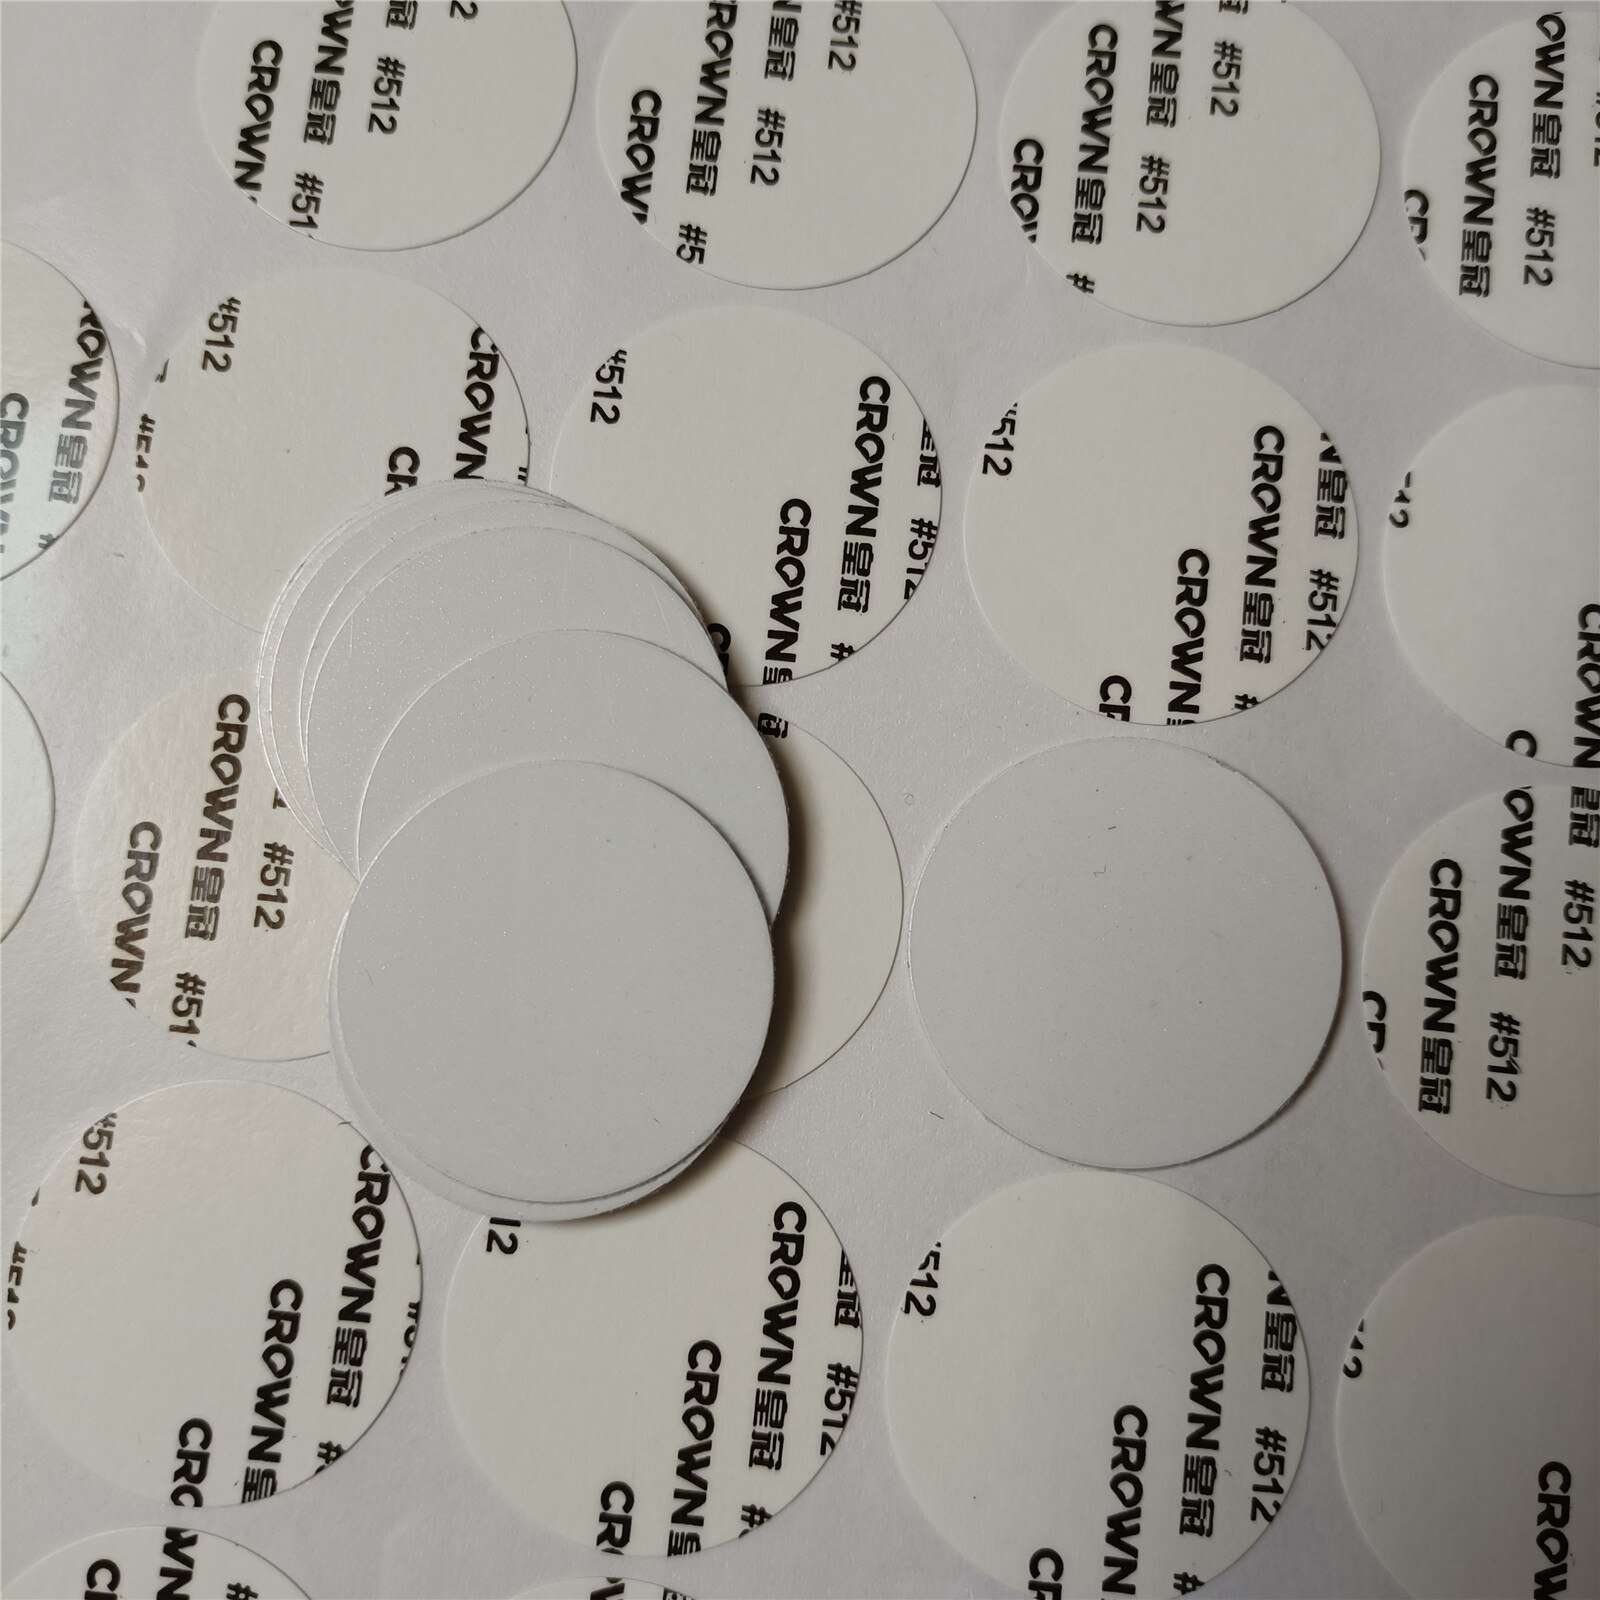 50pcs/lot Blank Sublimable Round Aluminum Patch 16mm 18mm 20mm 25mm 30mm 38mm Diameter 1.6cm 1.8cm 2cm 2.5cm 3cm 3.8cm: 38mm Patch and Tape